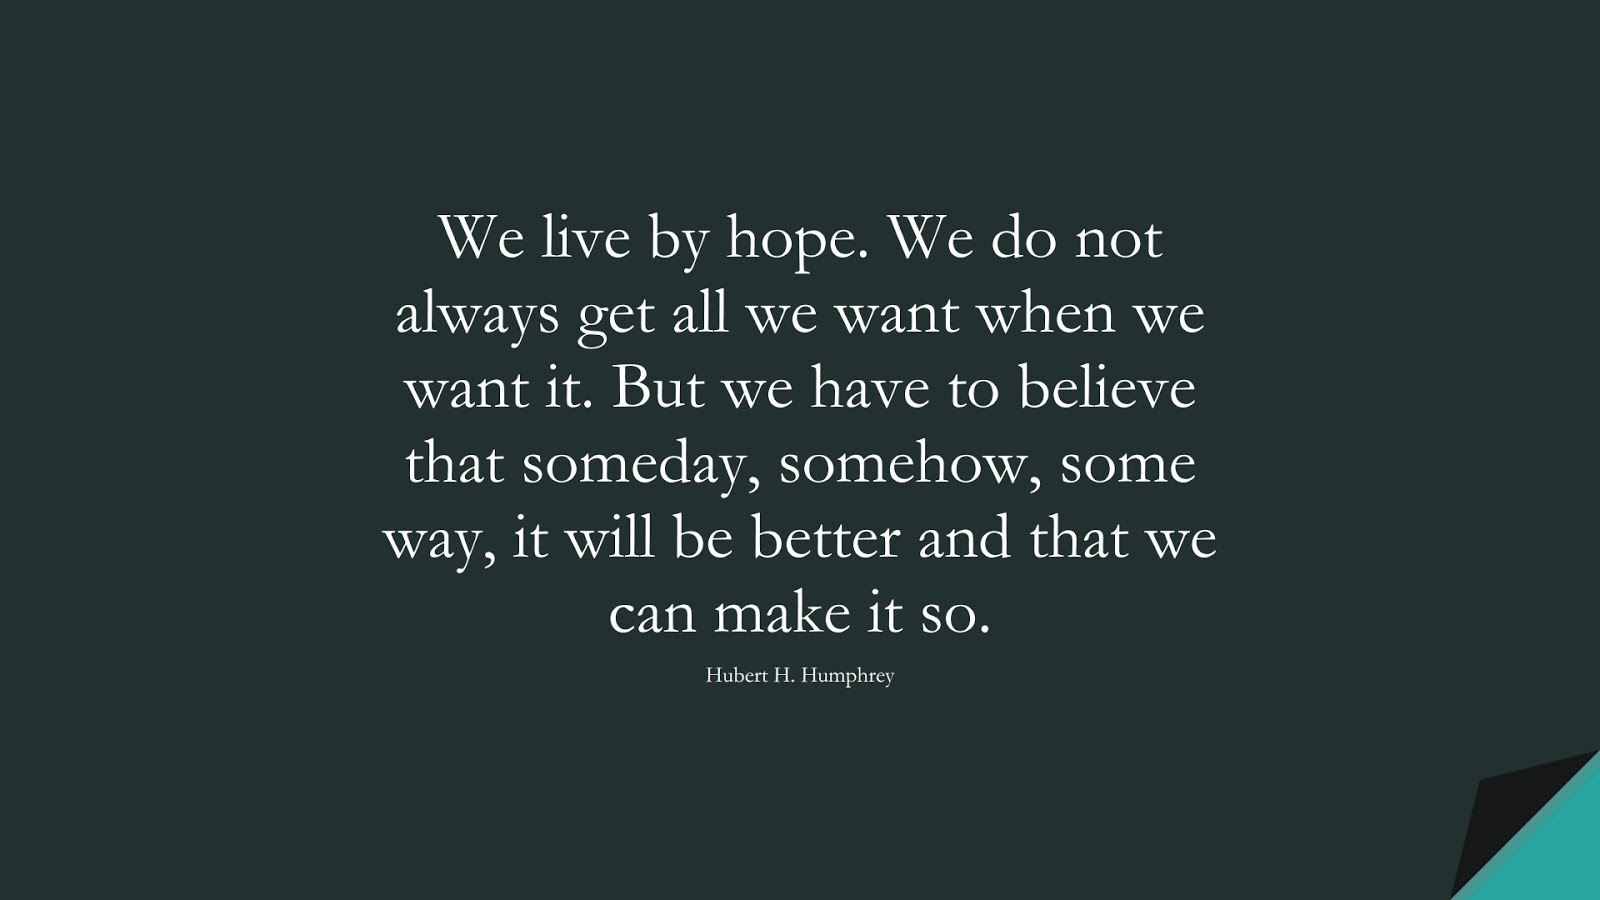 We live by hope. We do not always get all we want when we want it. But we have to believe that someday, somehow, some way, it will be better and that we can make it so. (Hubert H. Humphrey);  #HopeQuotes